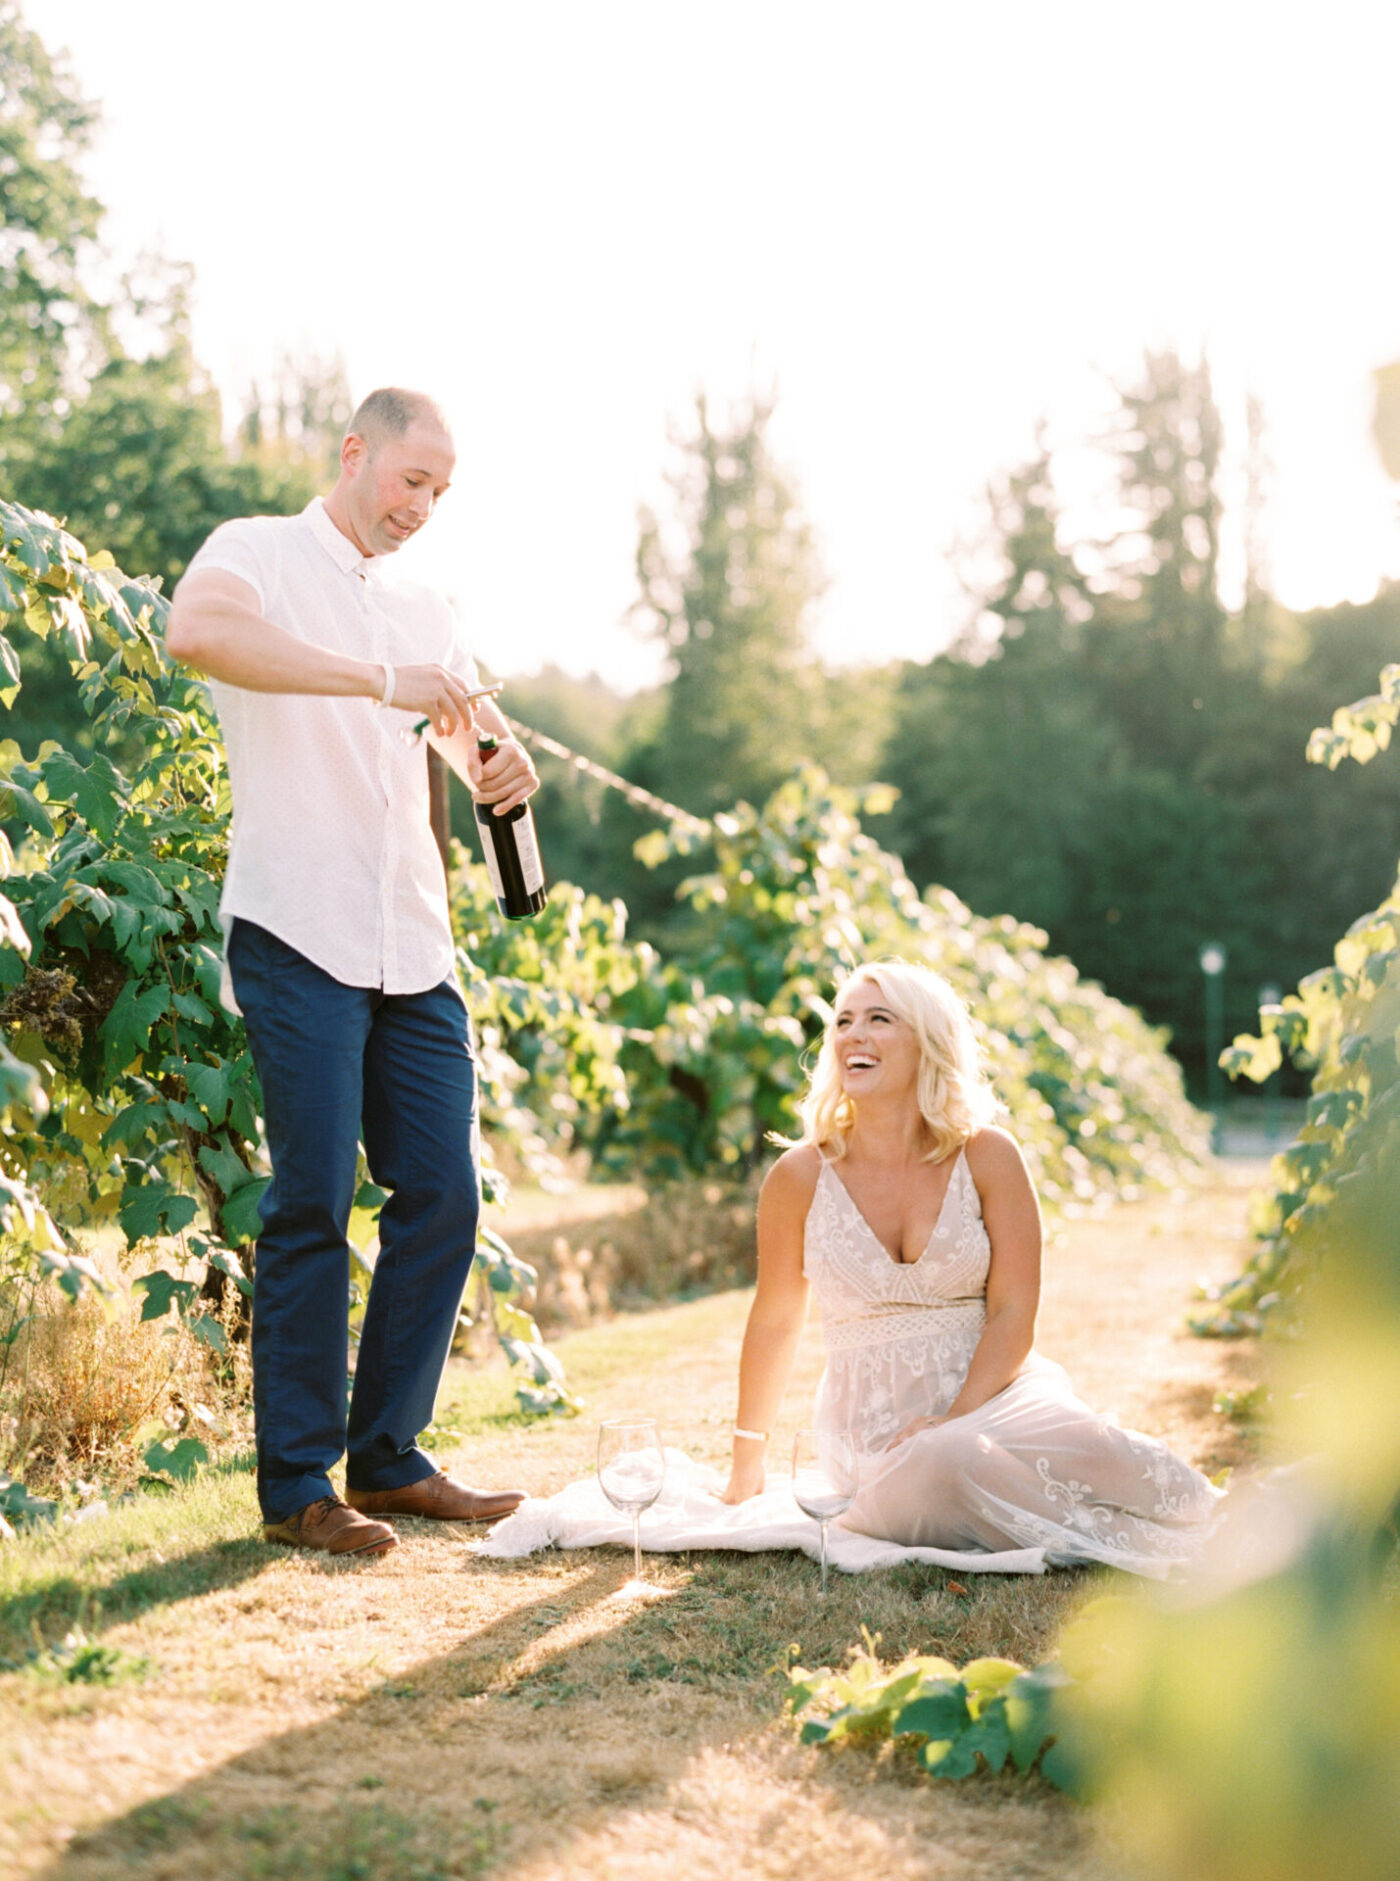 Seattle Summer Engagement Session Locations